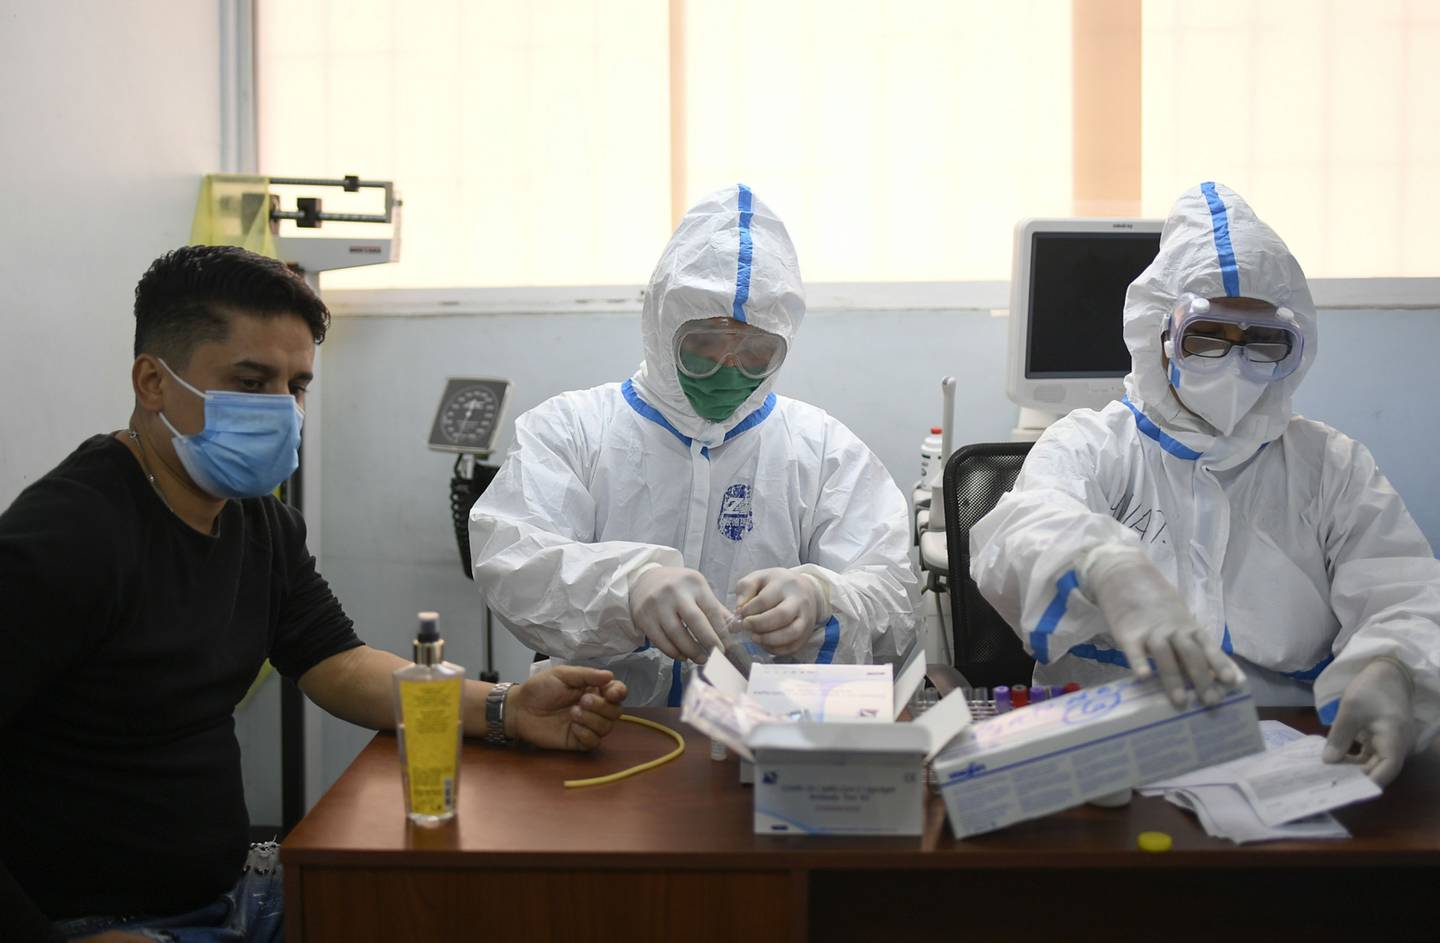 Health workers carry out a Covid test on a patient at a CDI diagnostics center in Caracas. (Archive photo).dfd